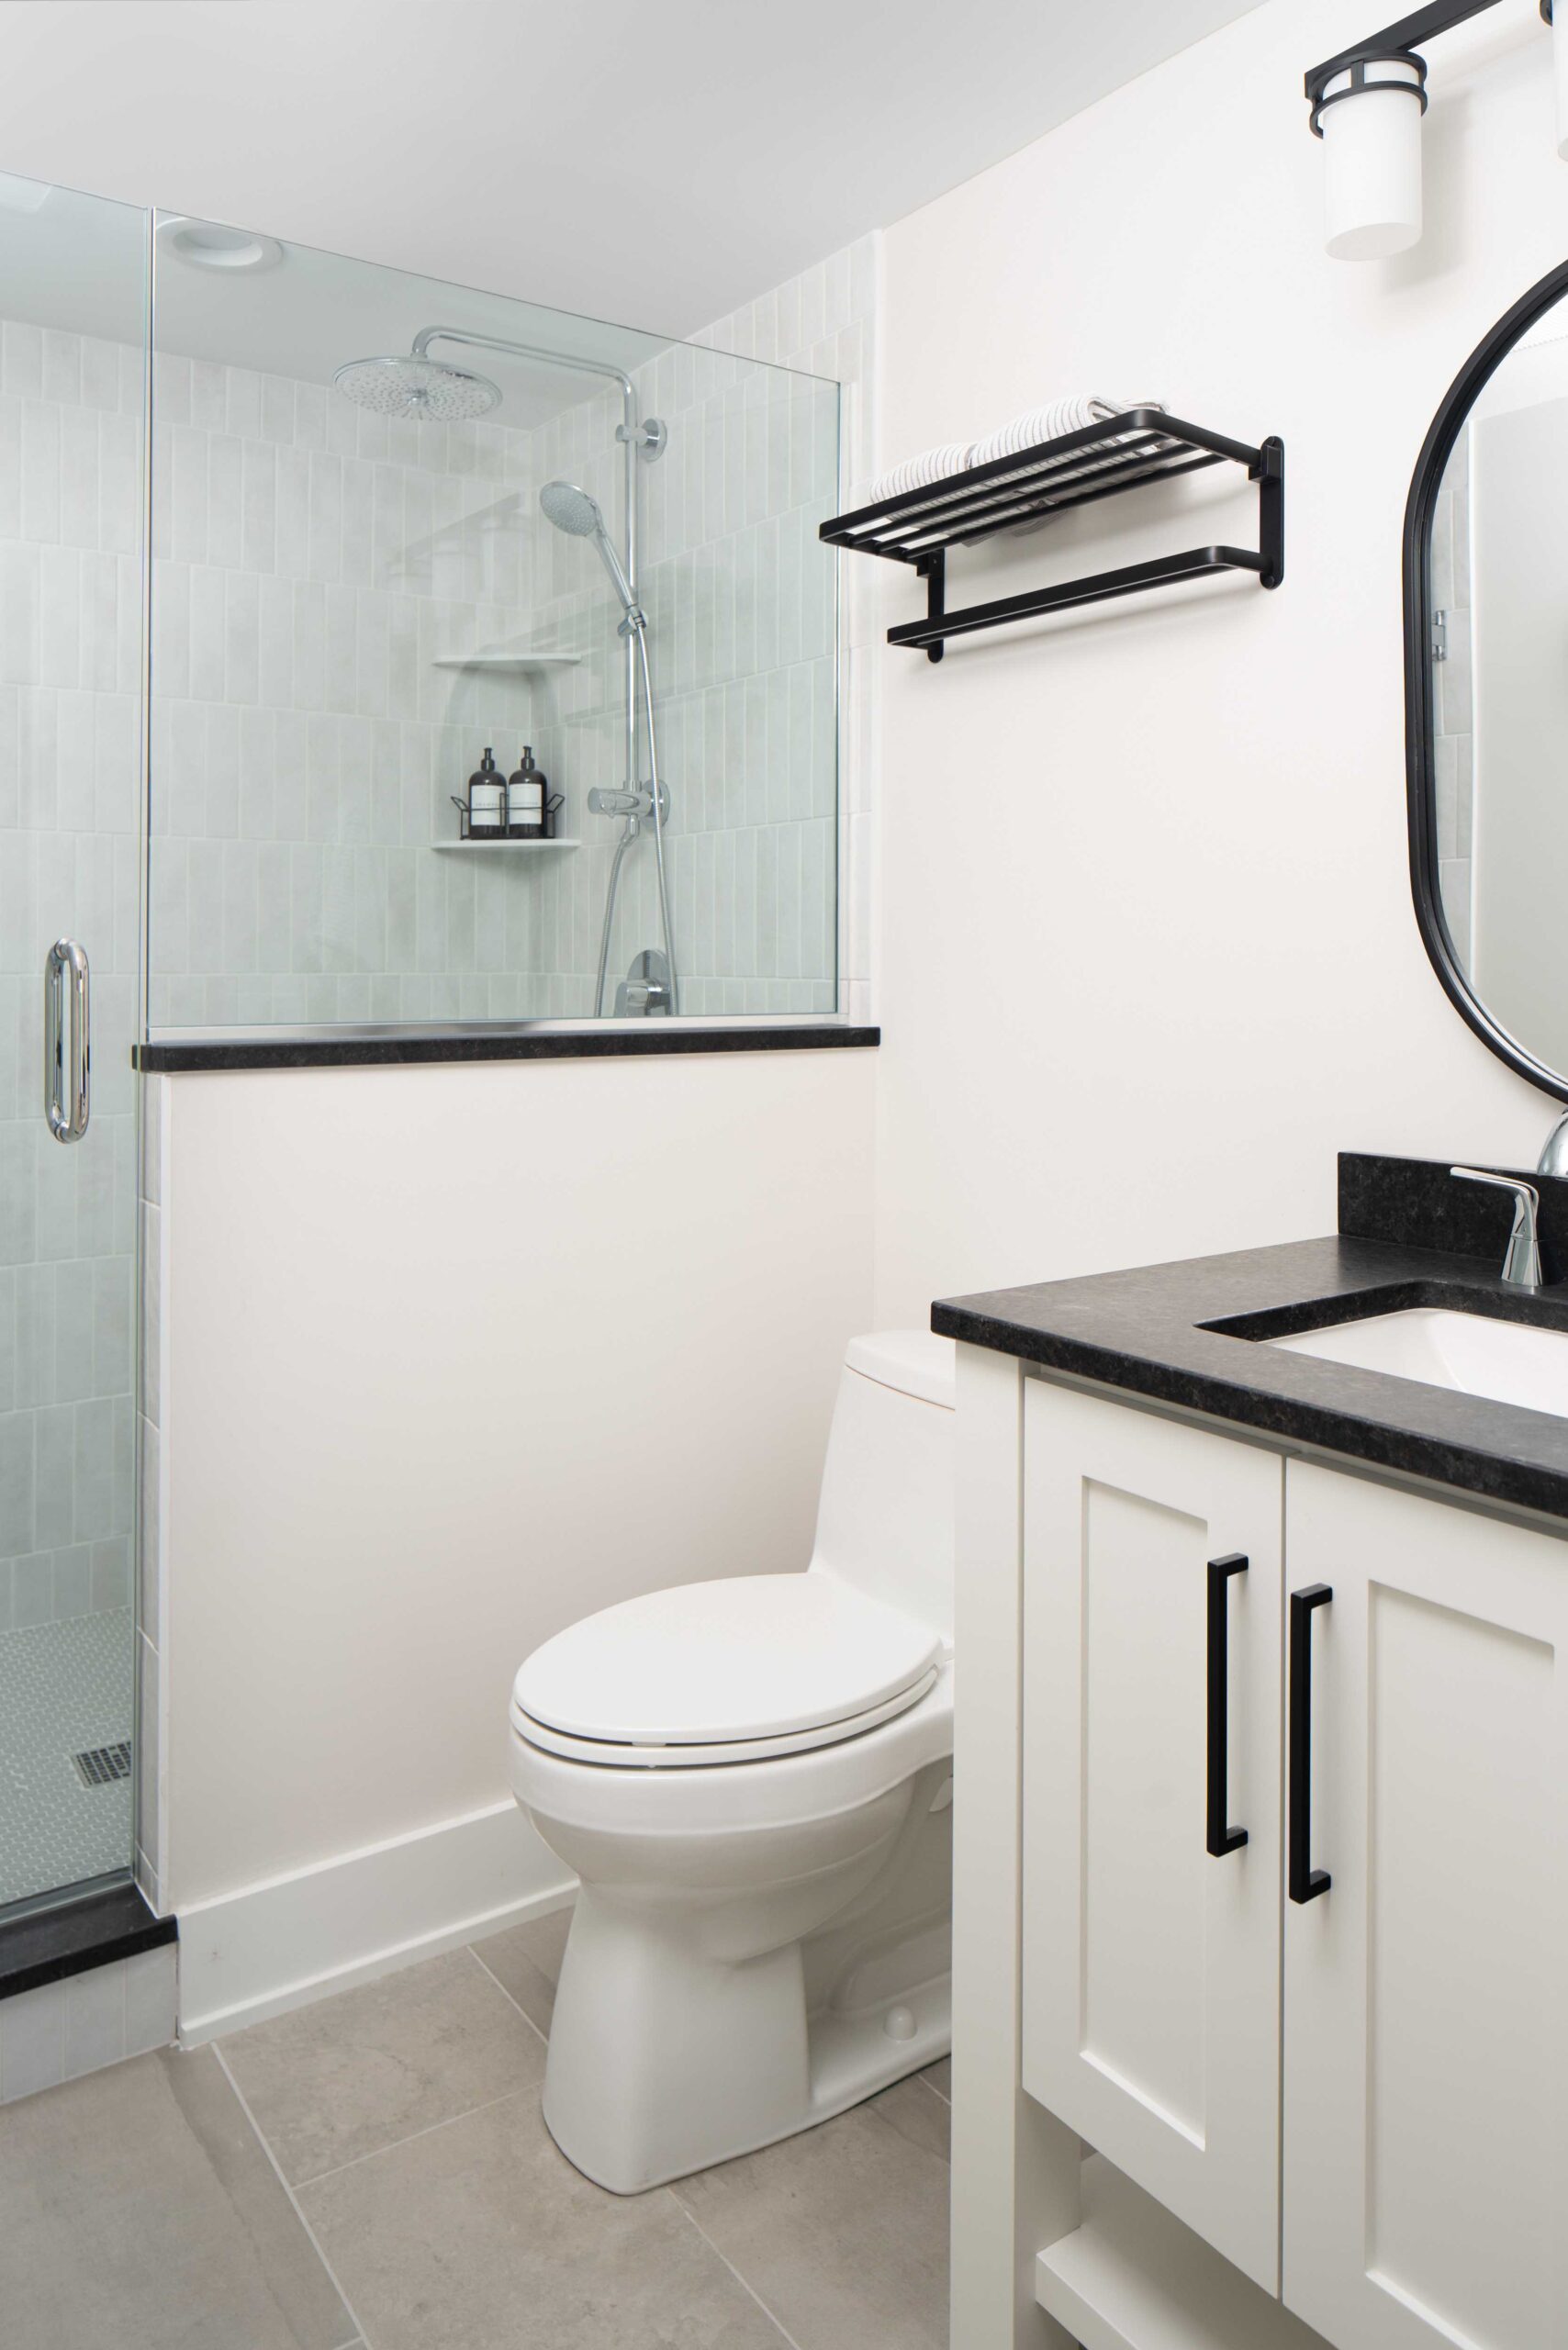 The Orchard Lake remodel features a sleek black and white bathroom with a stunning glass shower stall.